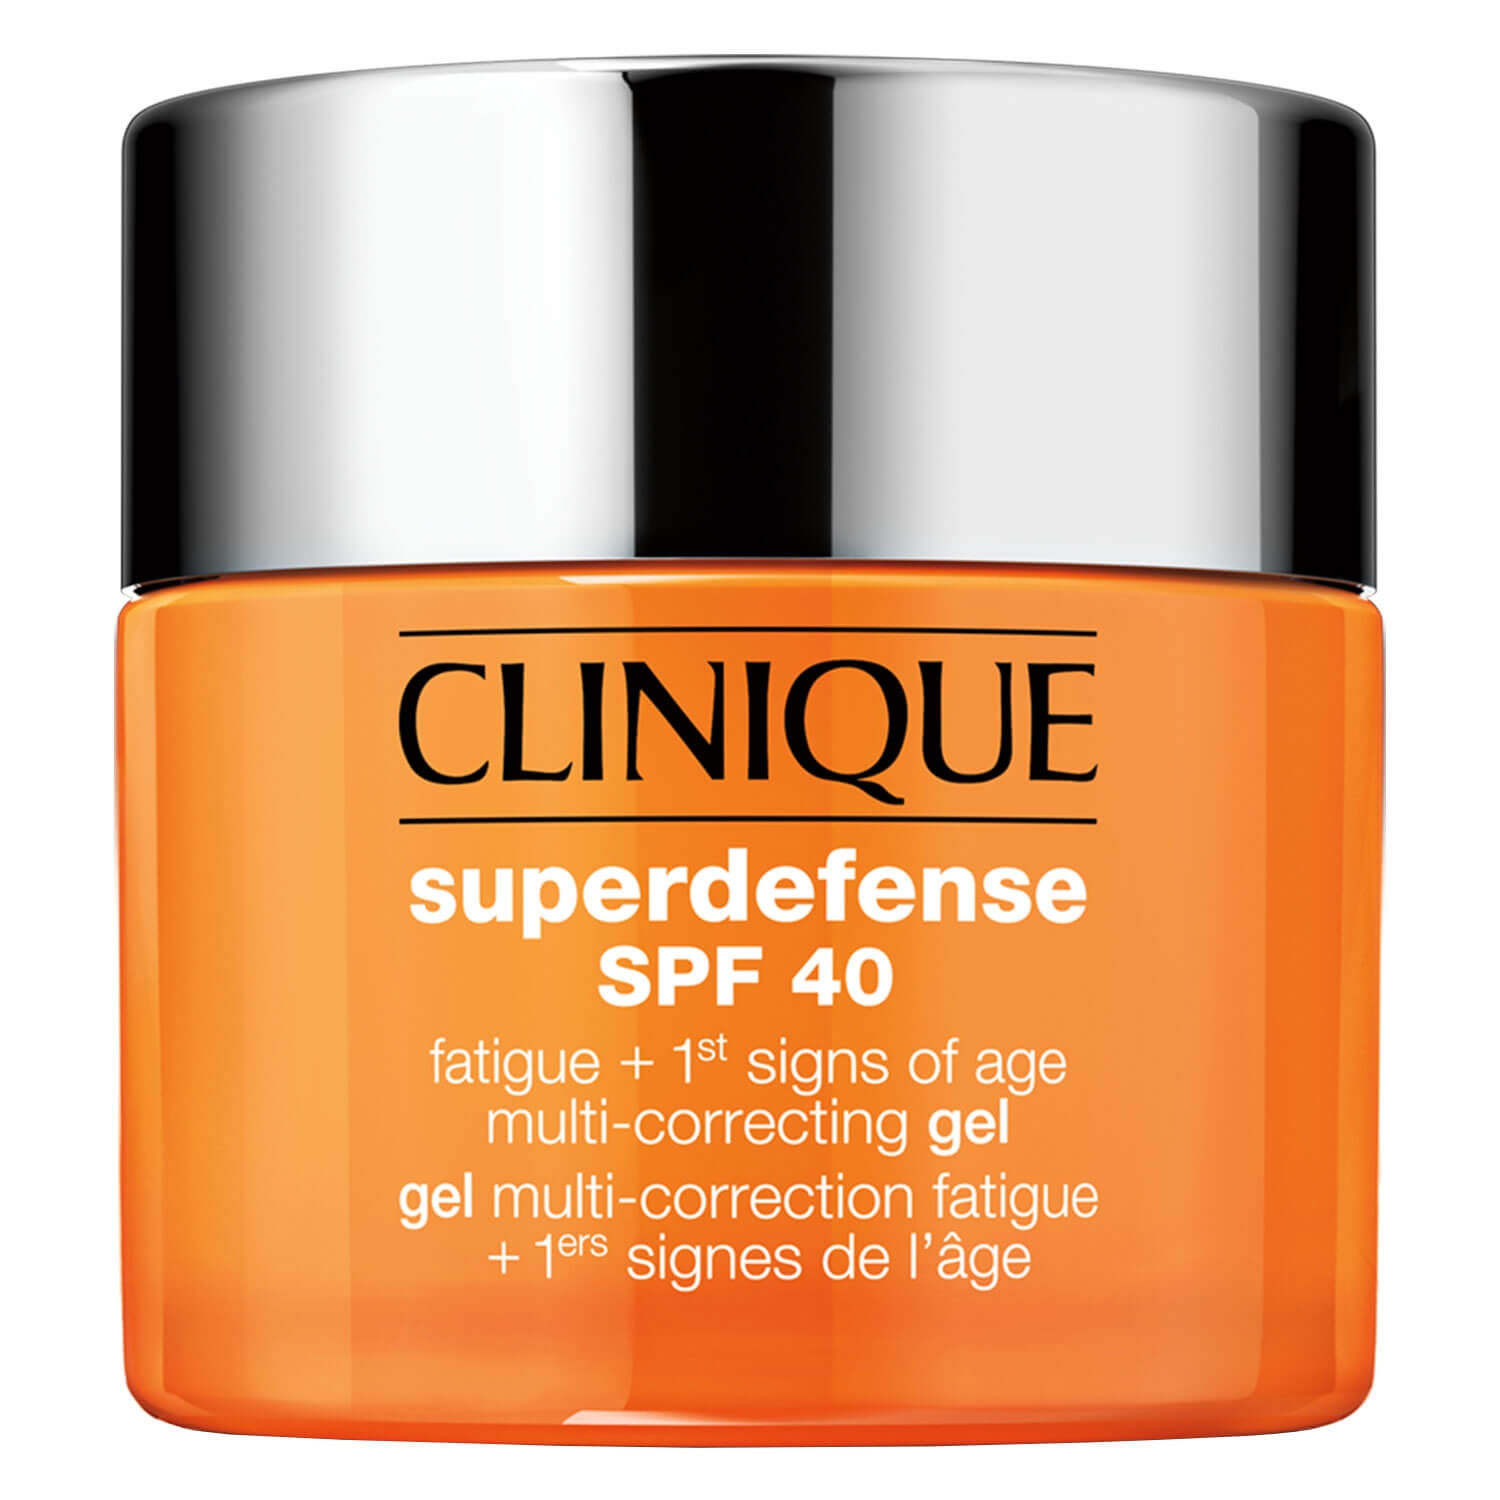 Product image from Superdefense - SPF 40 Fatigue + 1st Signs of Age Multi-Correcting Gel